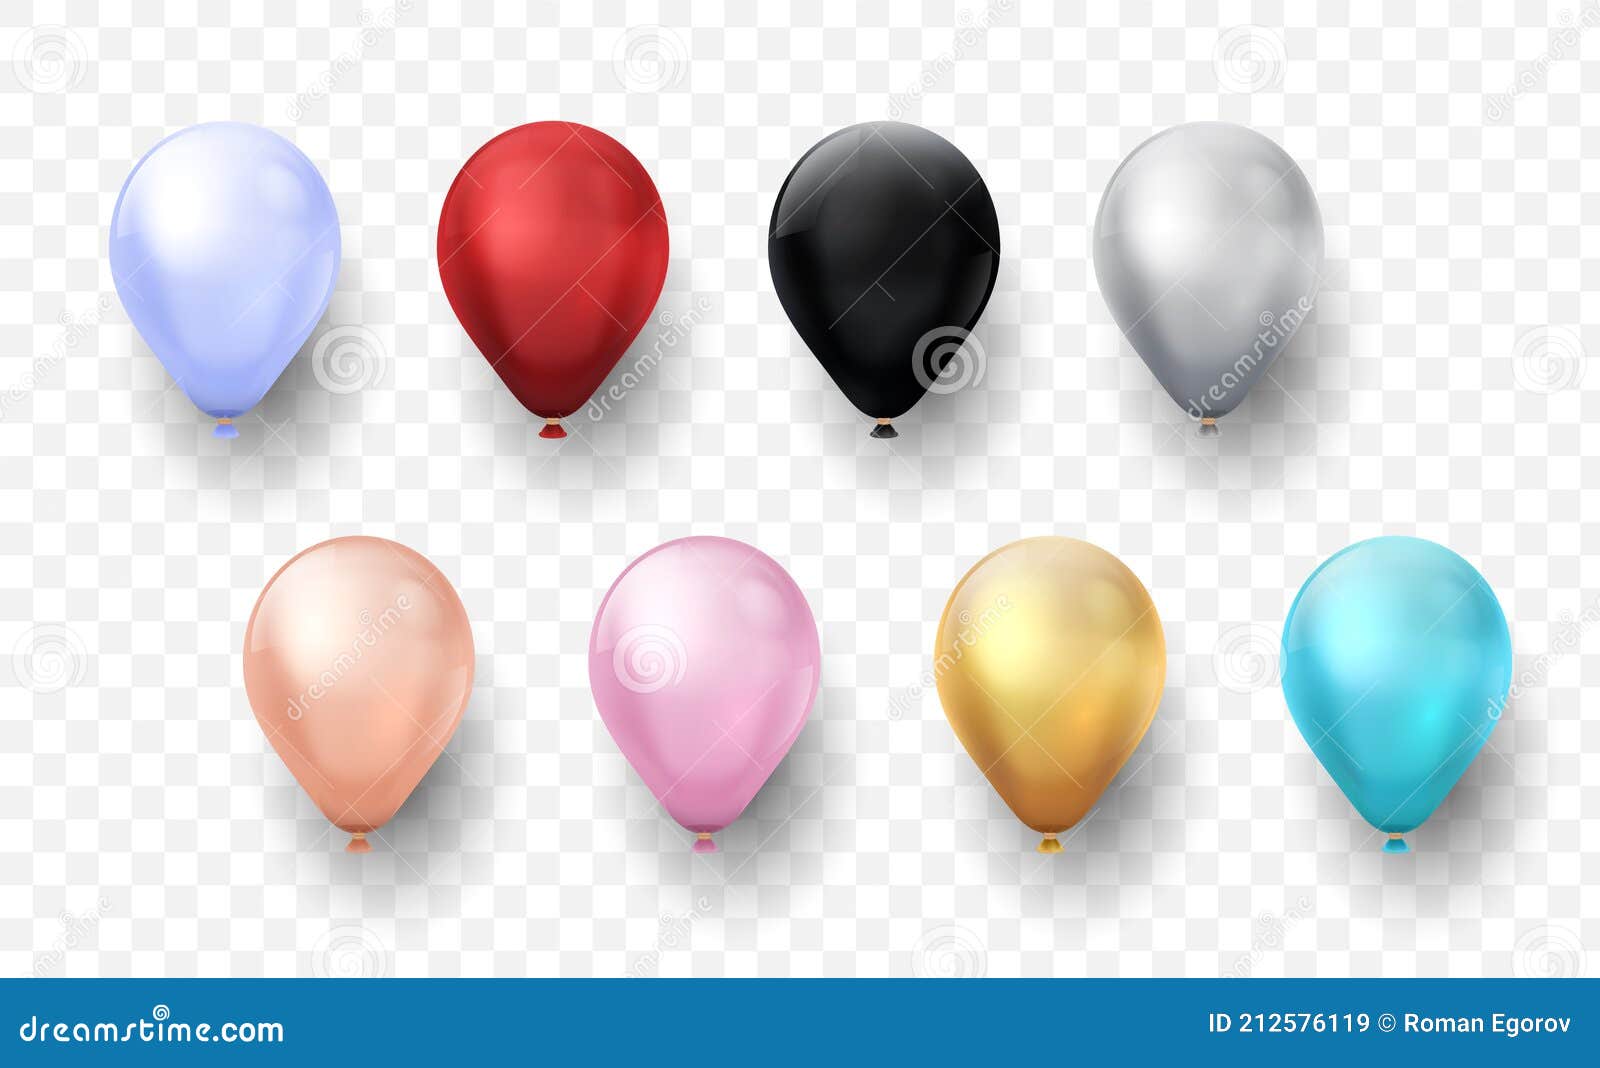 realistic balloons. 3d inflated round s for holiday party. colorful helium balls on transparent background